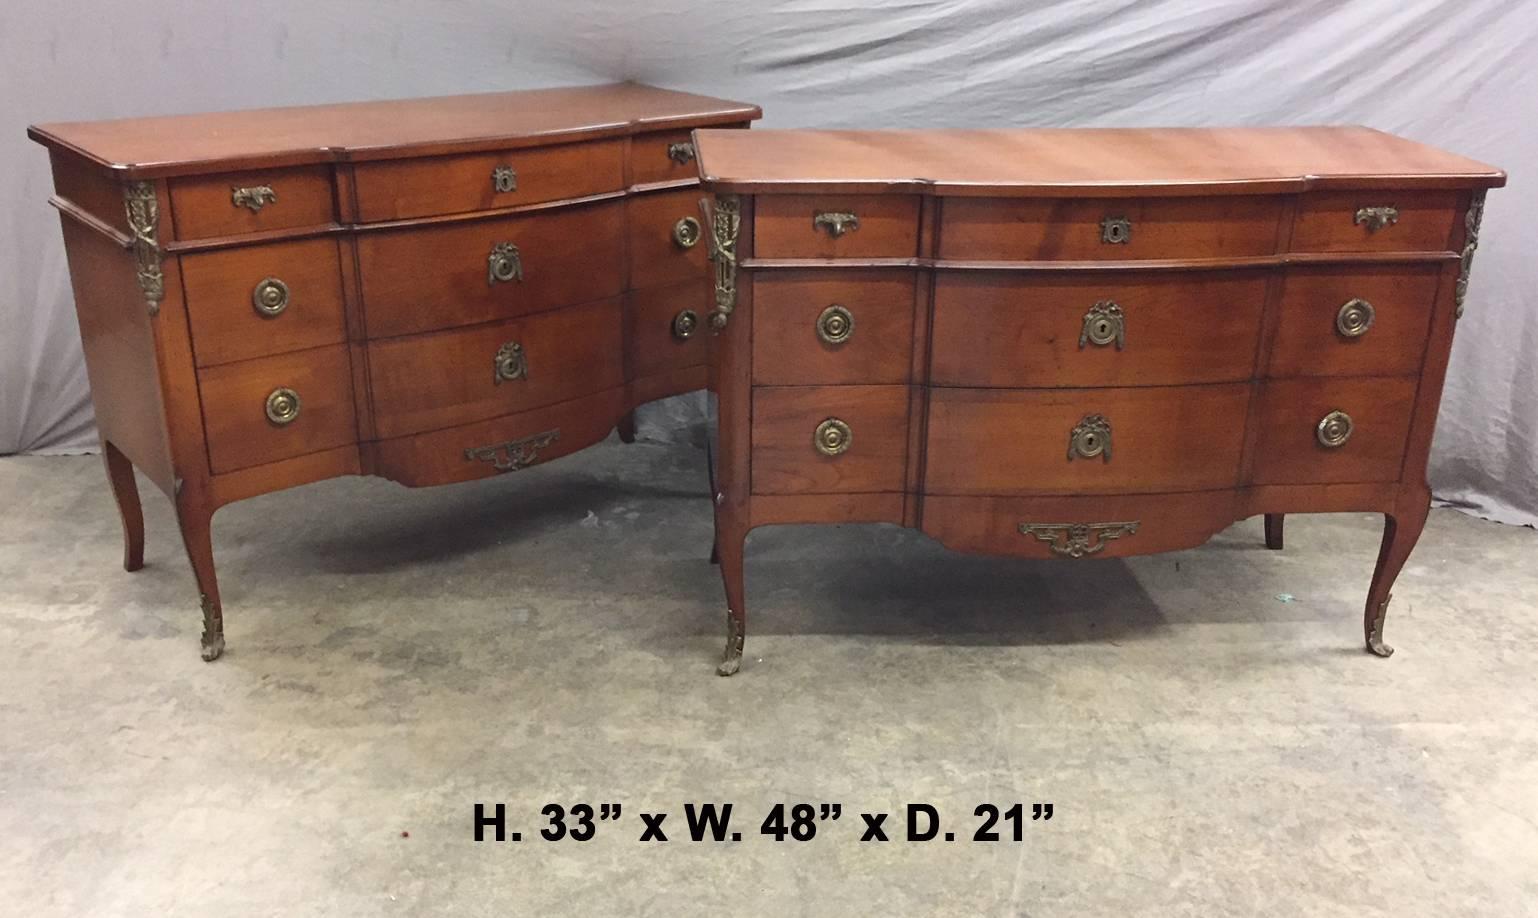 Impressive pair of French Louis XV / Louis XVI Transitional style bronze mounted fruitwood commodes with three small drawers and two large drawers all mounted with bronze handles, all supported by four cabriole legs terminating in bronze sabots.